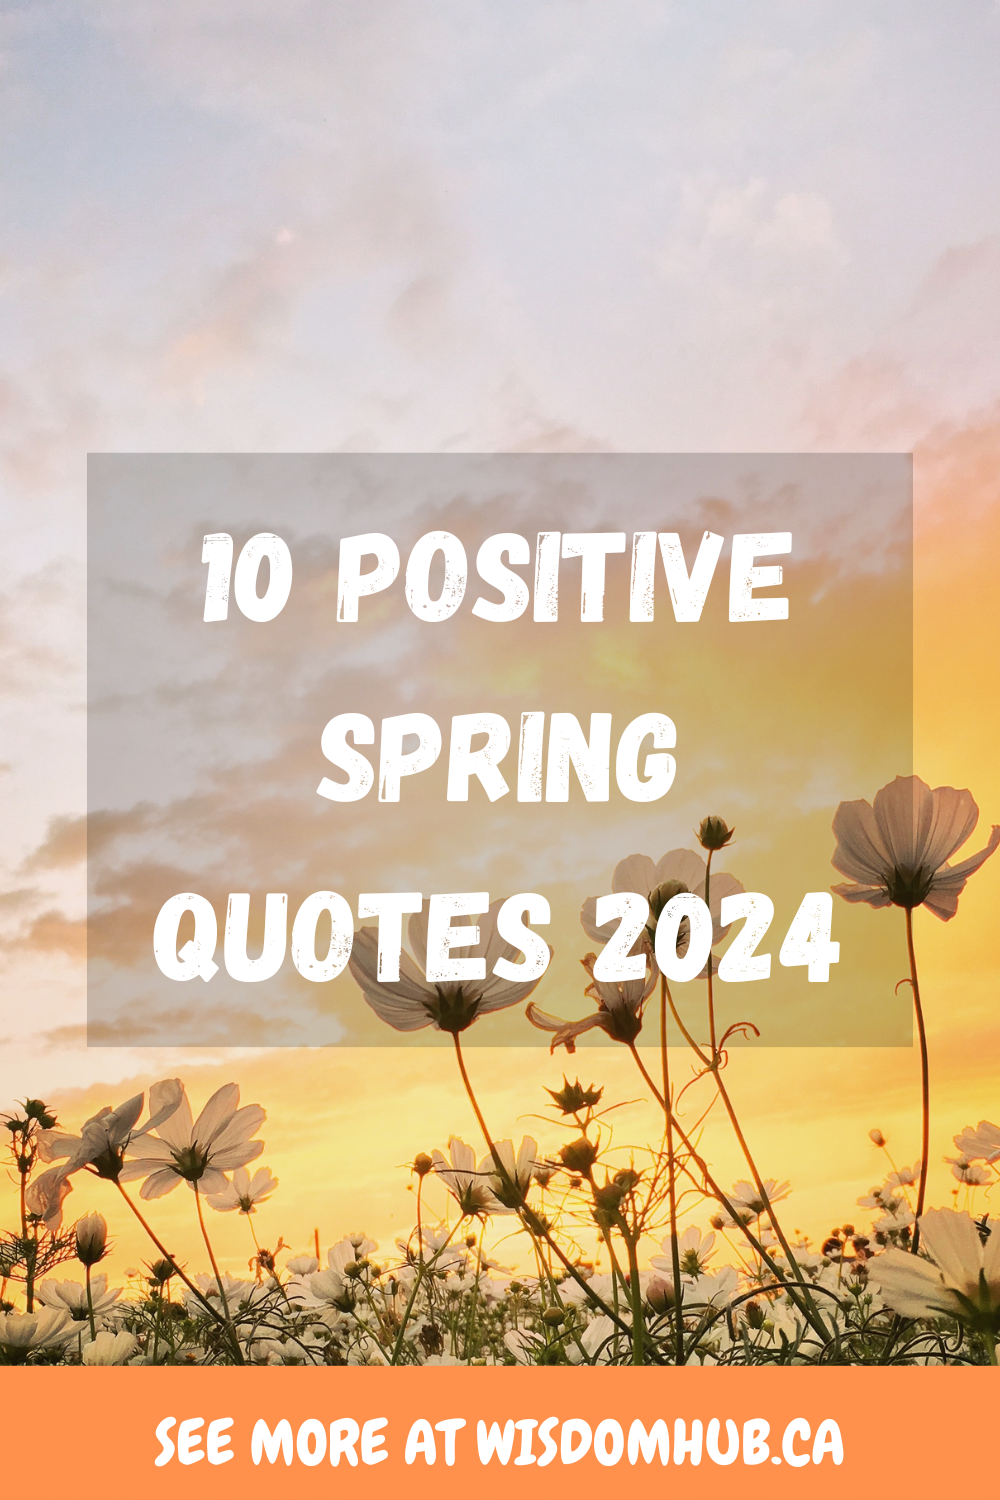 10 Positive Spring Quotes 2024